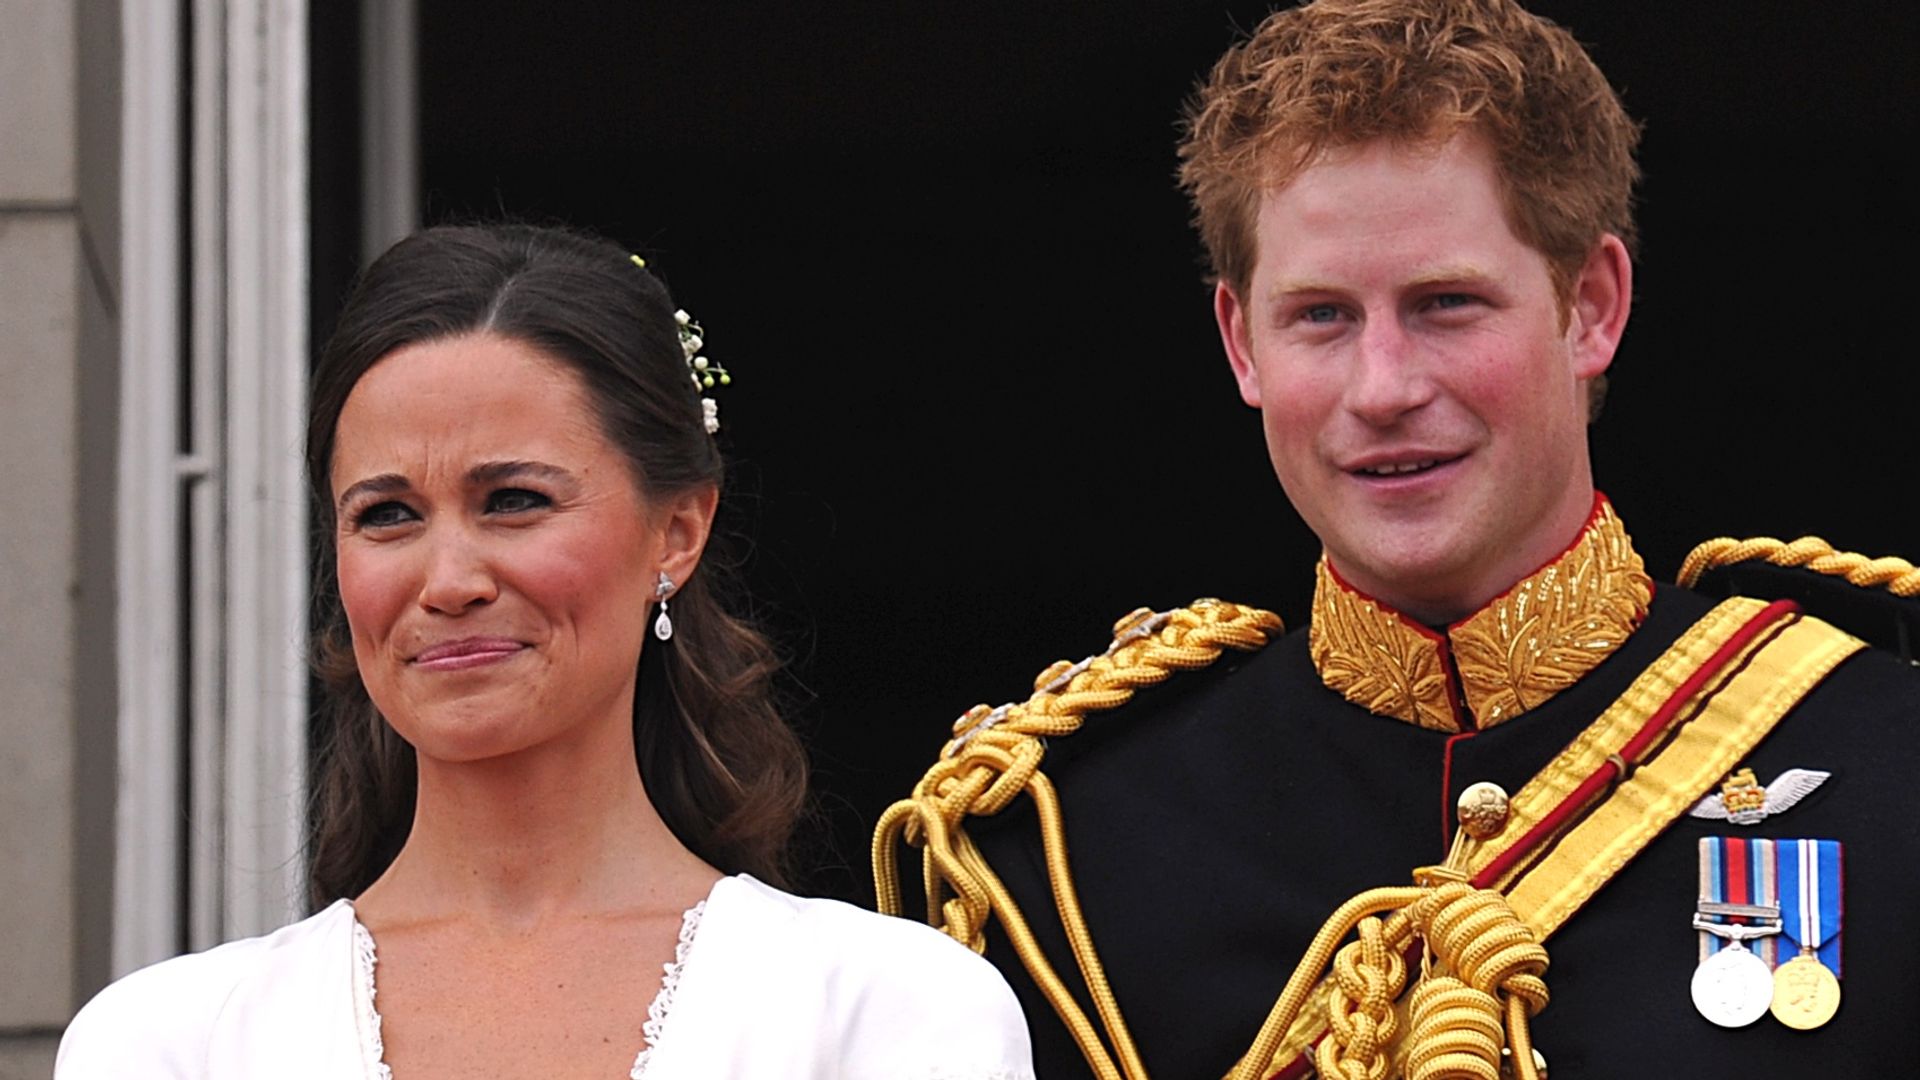 Prince Harry smiling next to maid of honour Pippa Middleton at Kate and William's 2011 wedding